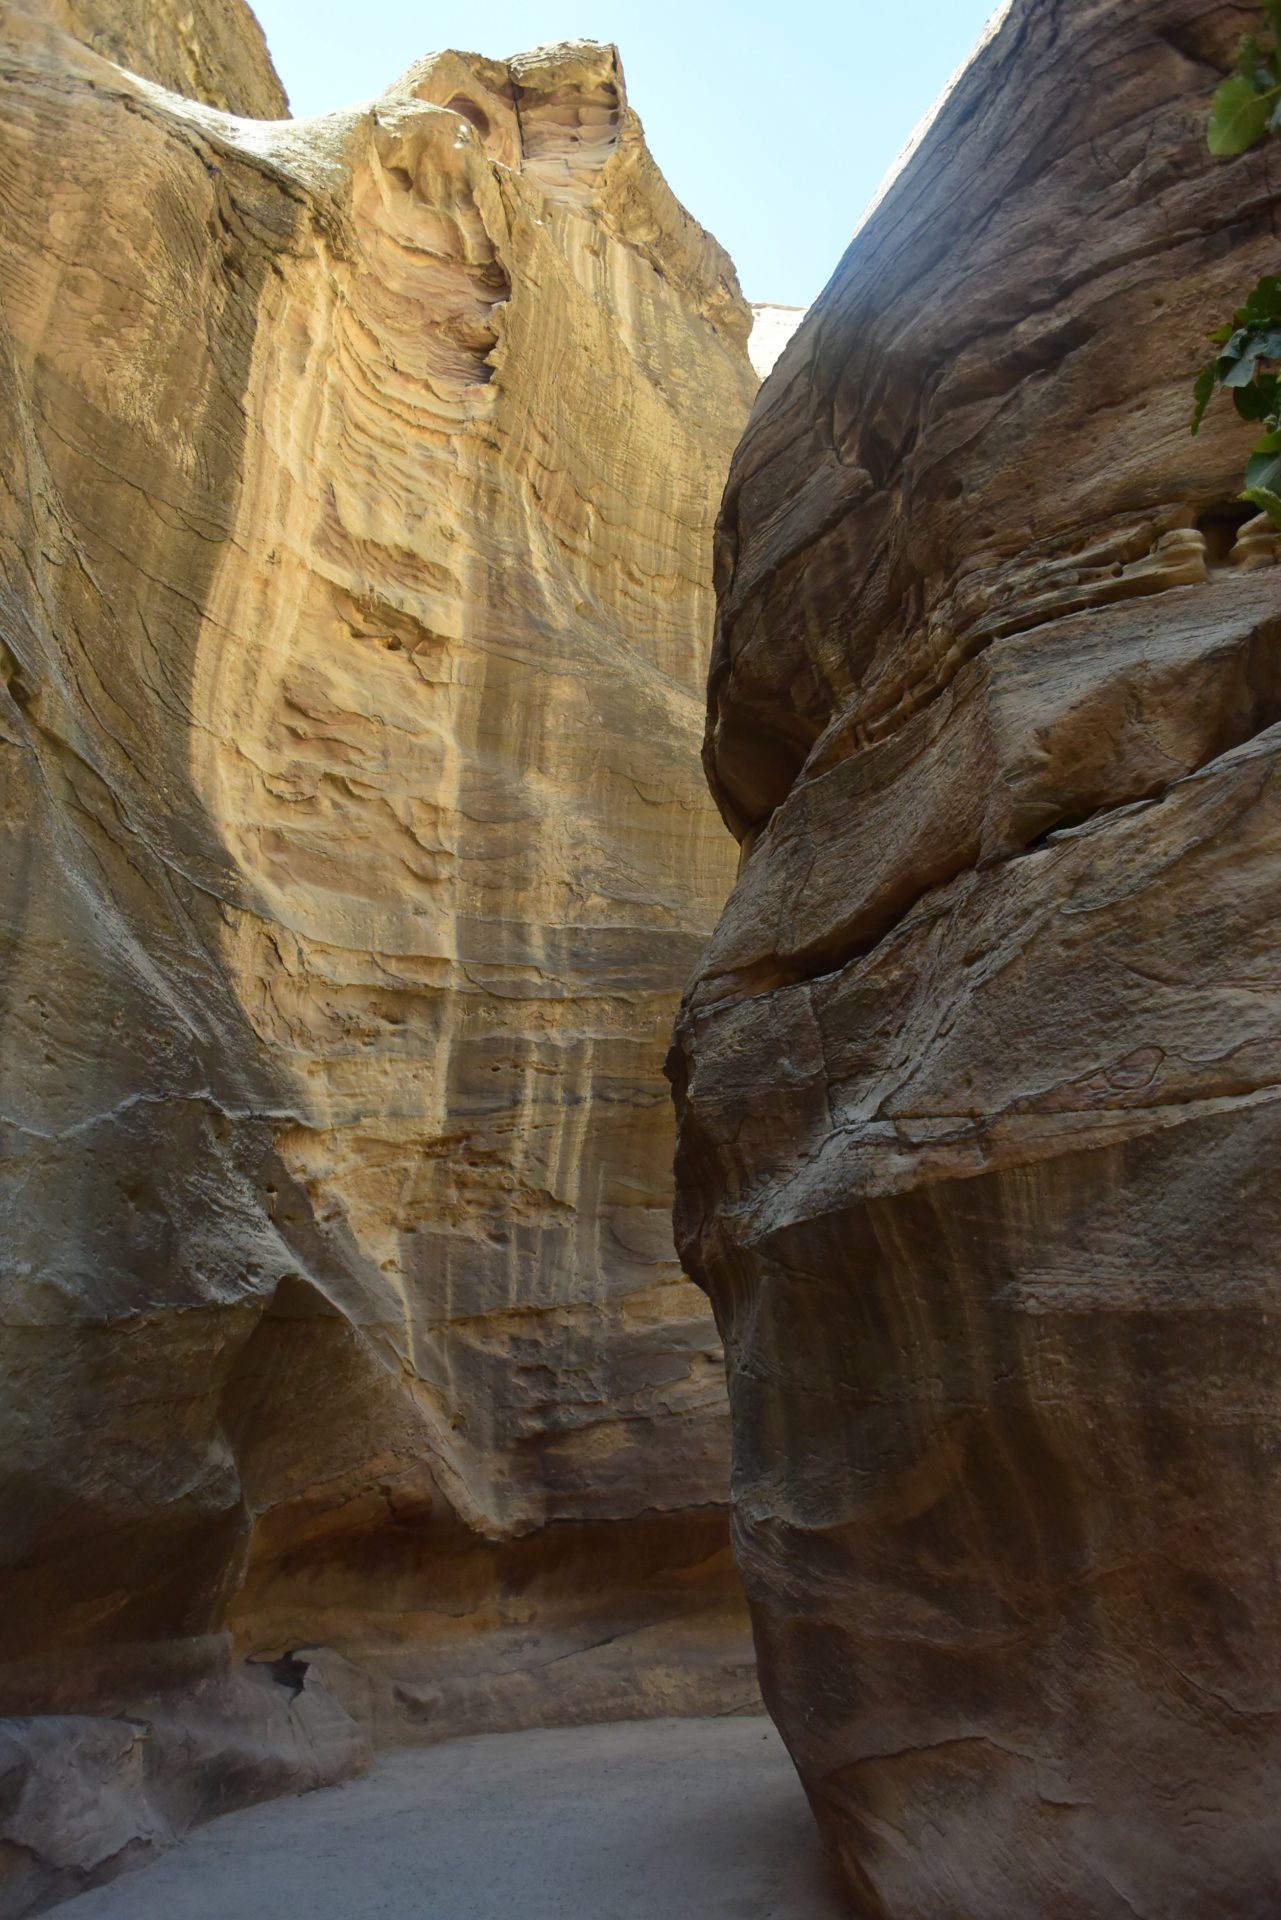 a large rock formations in a canyon with Ein Avdat in the background